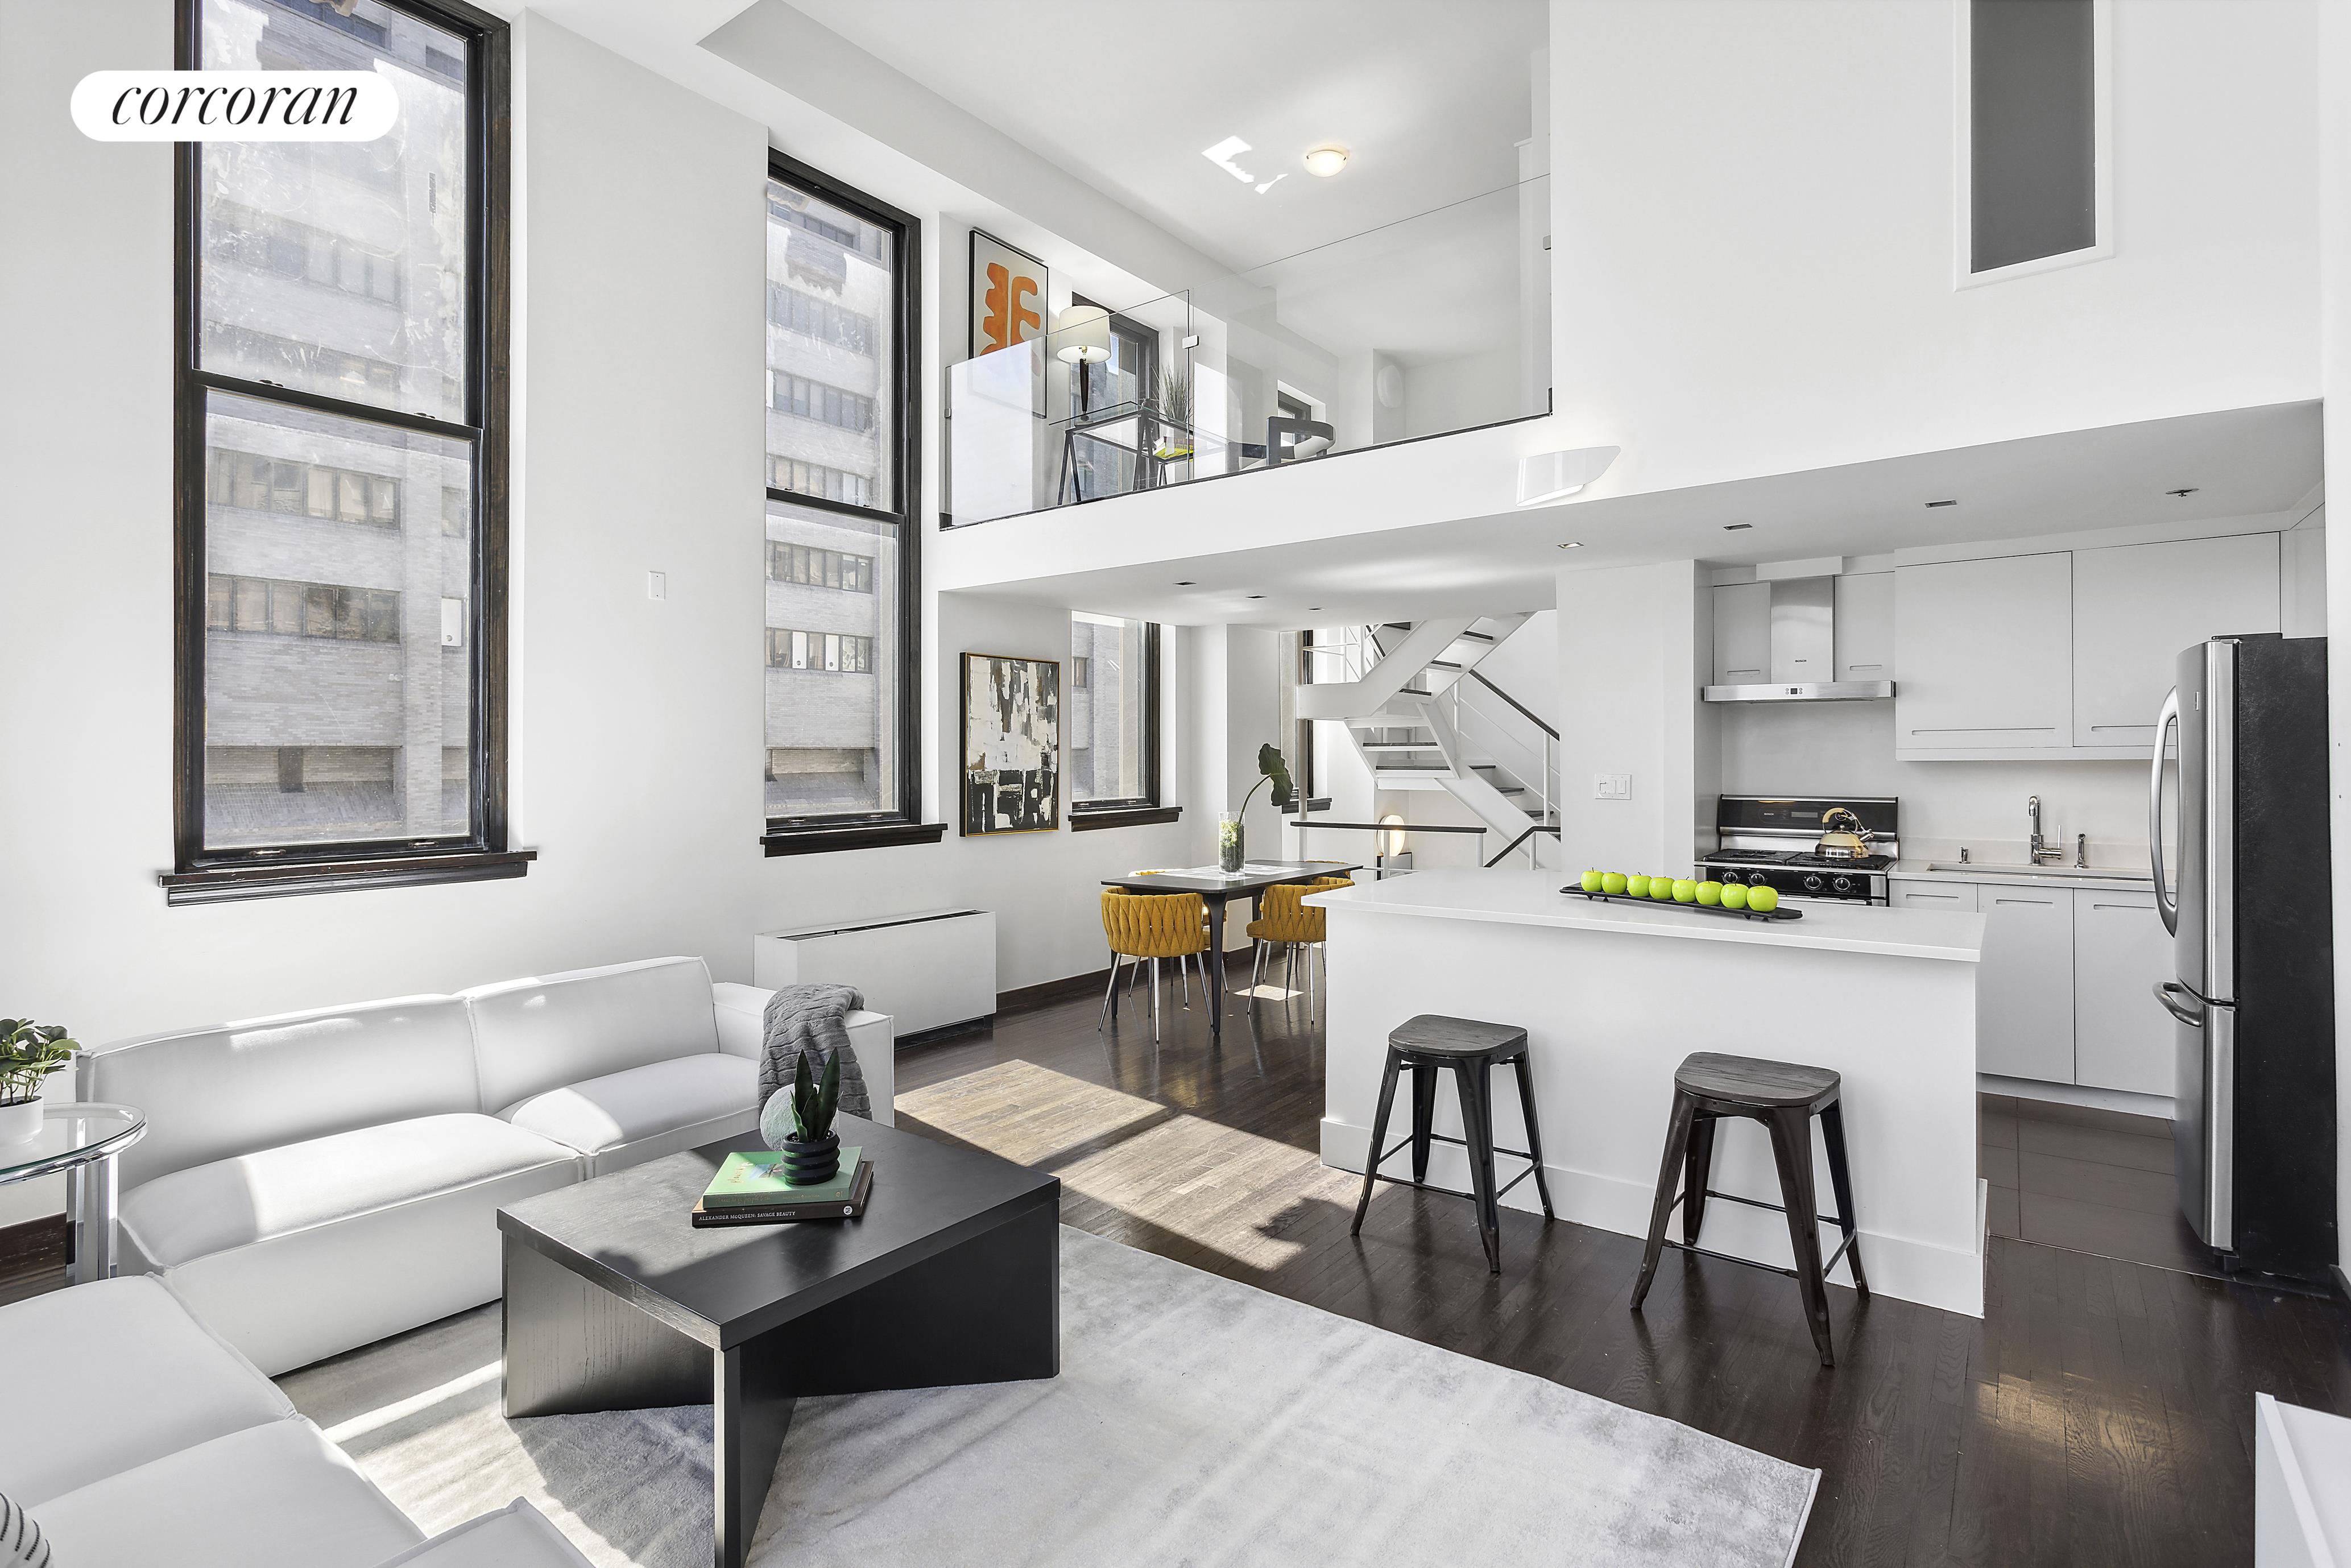 305 2nd Avenue 522, Gramercy Park, Downtown, NYC - 1 Bedrooms  
2 Bathrooms  
4 Rooms - 